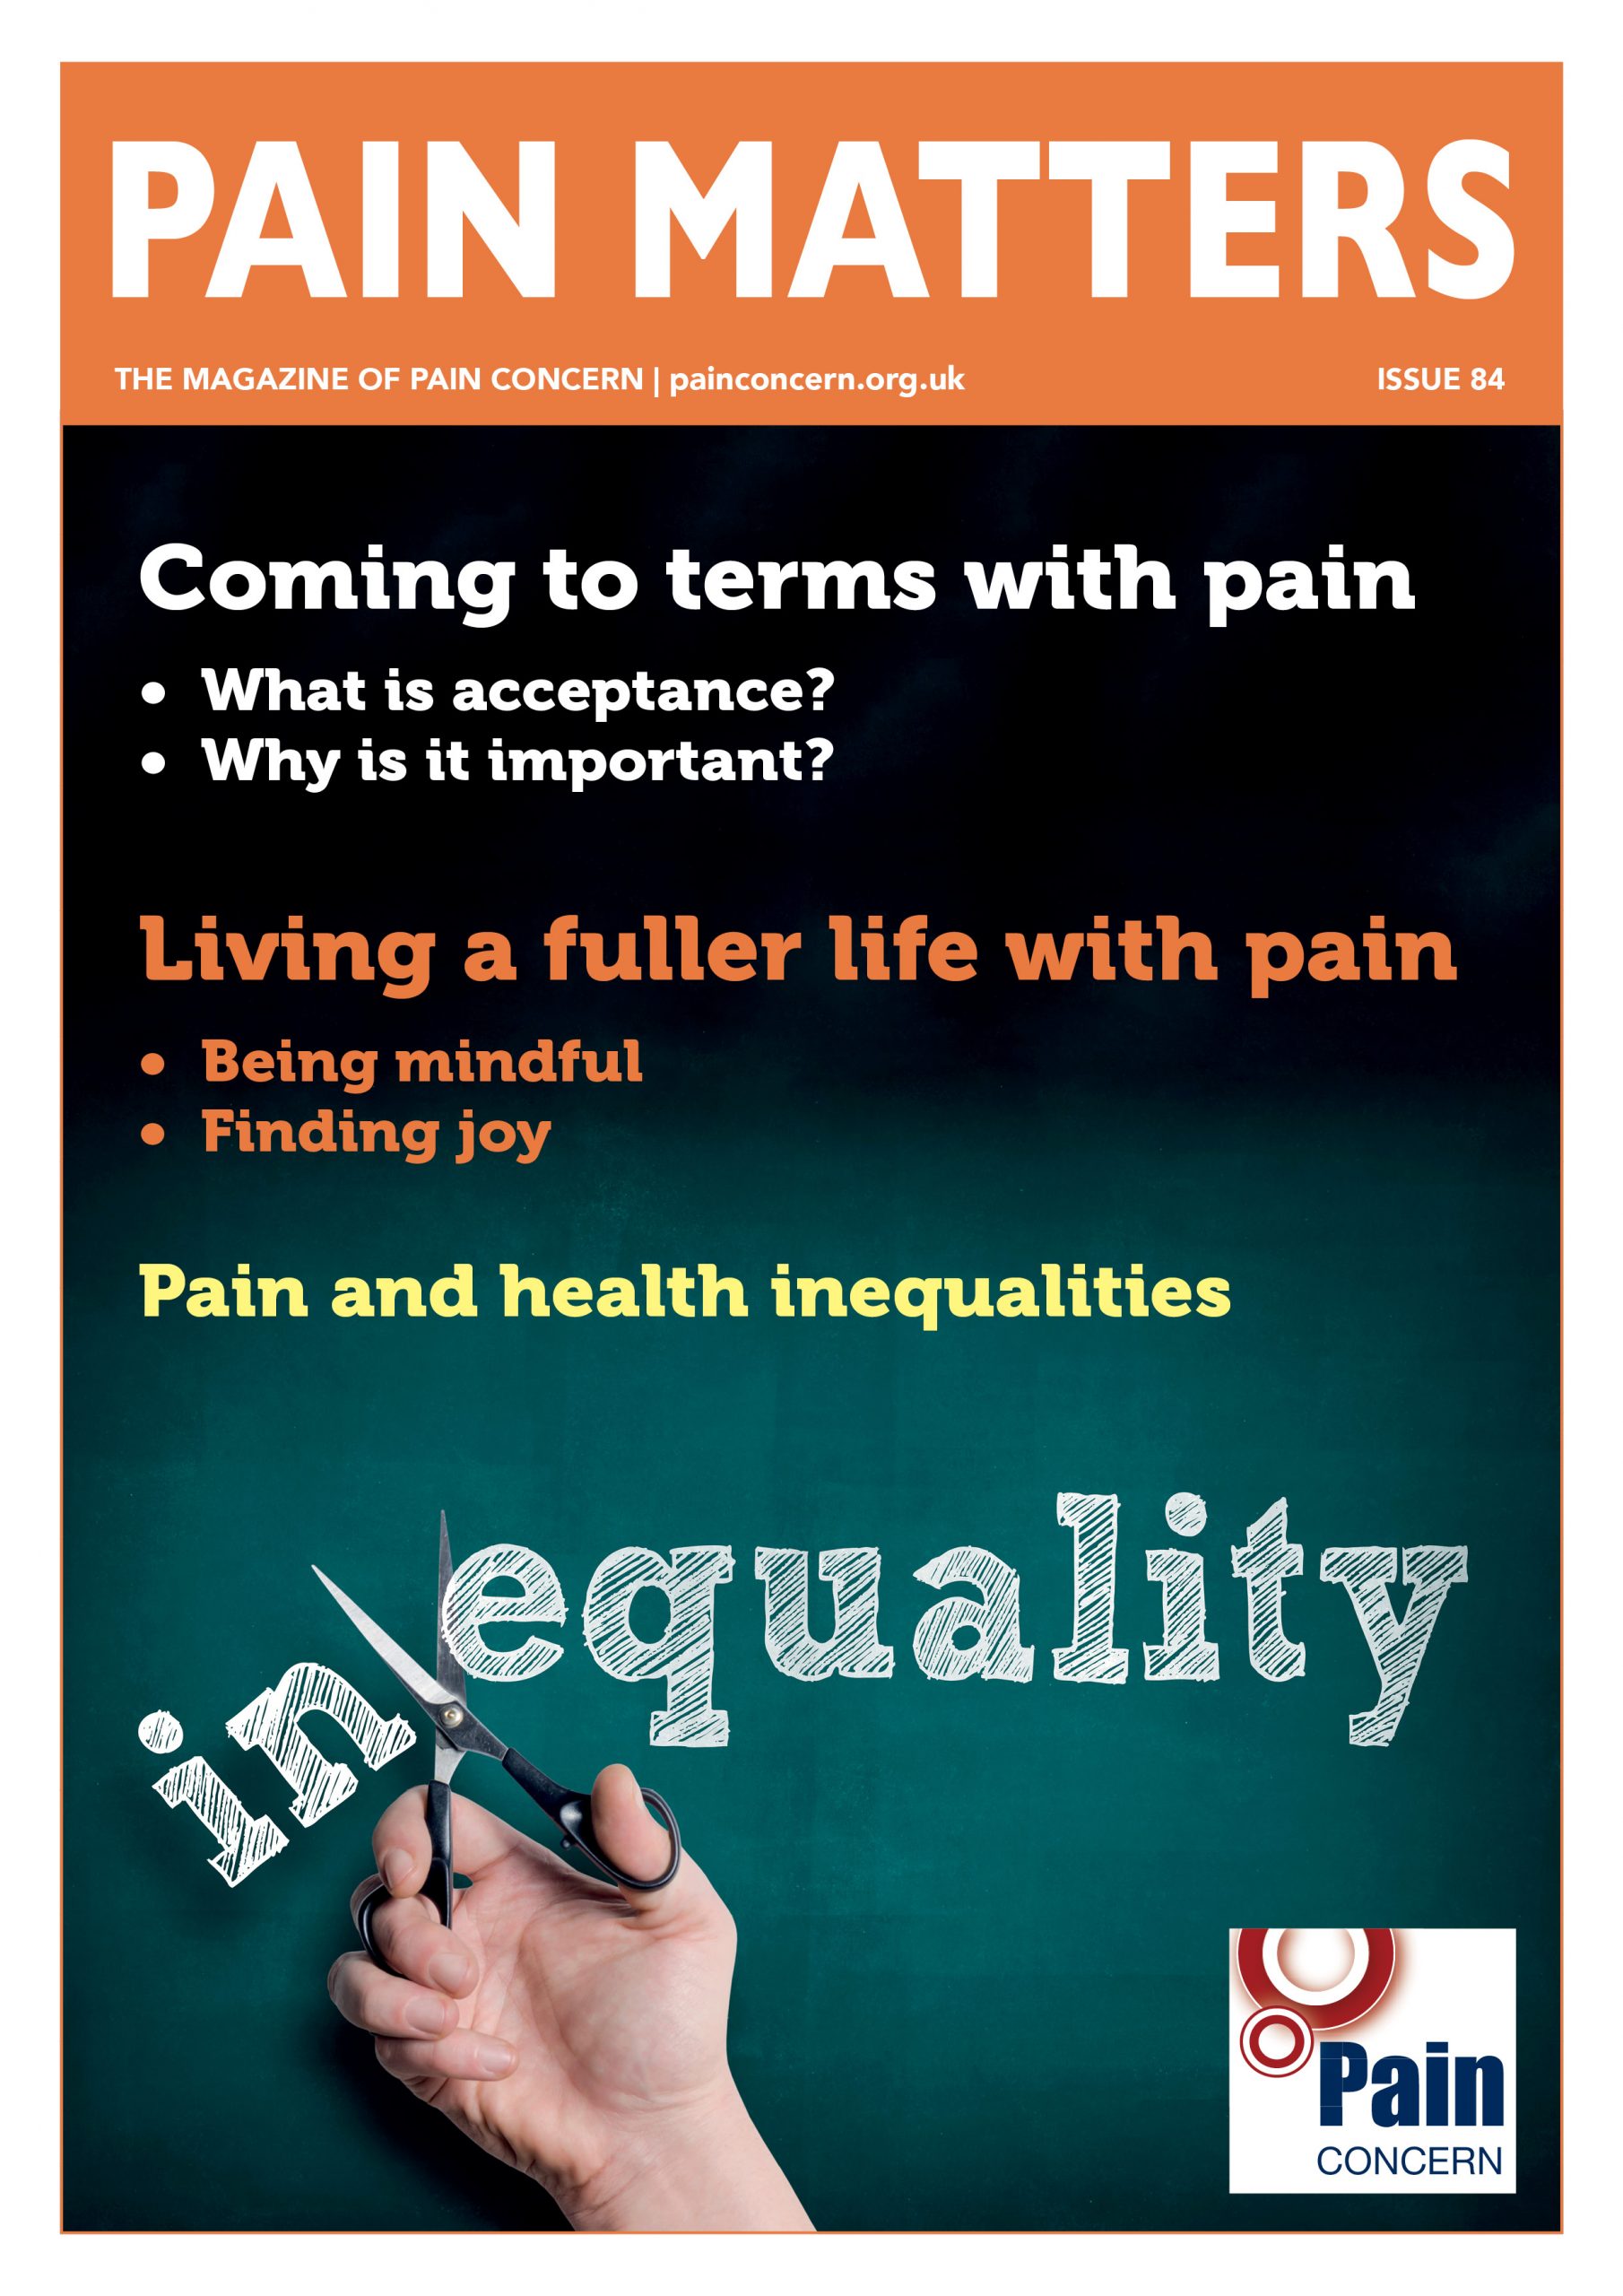 Pain Matters 84 front cover includes a graphic of the word inequality being cut in half.